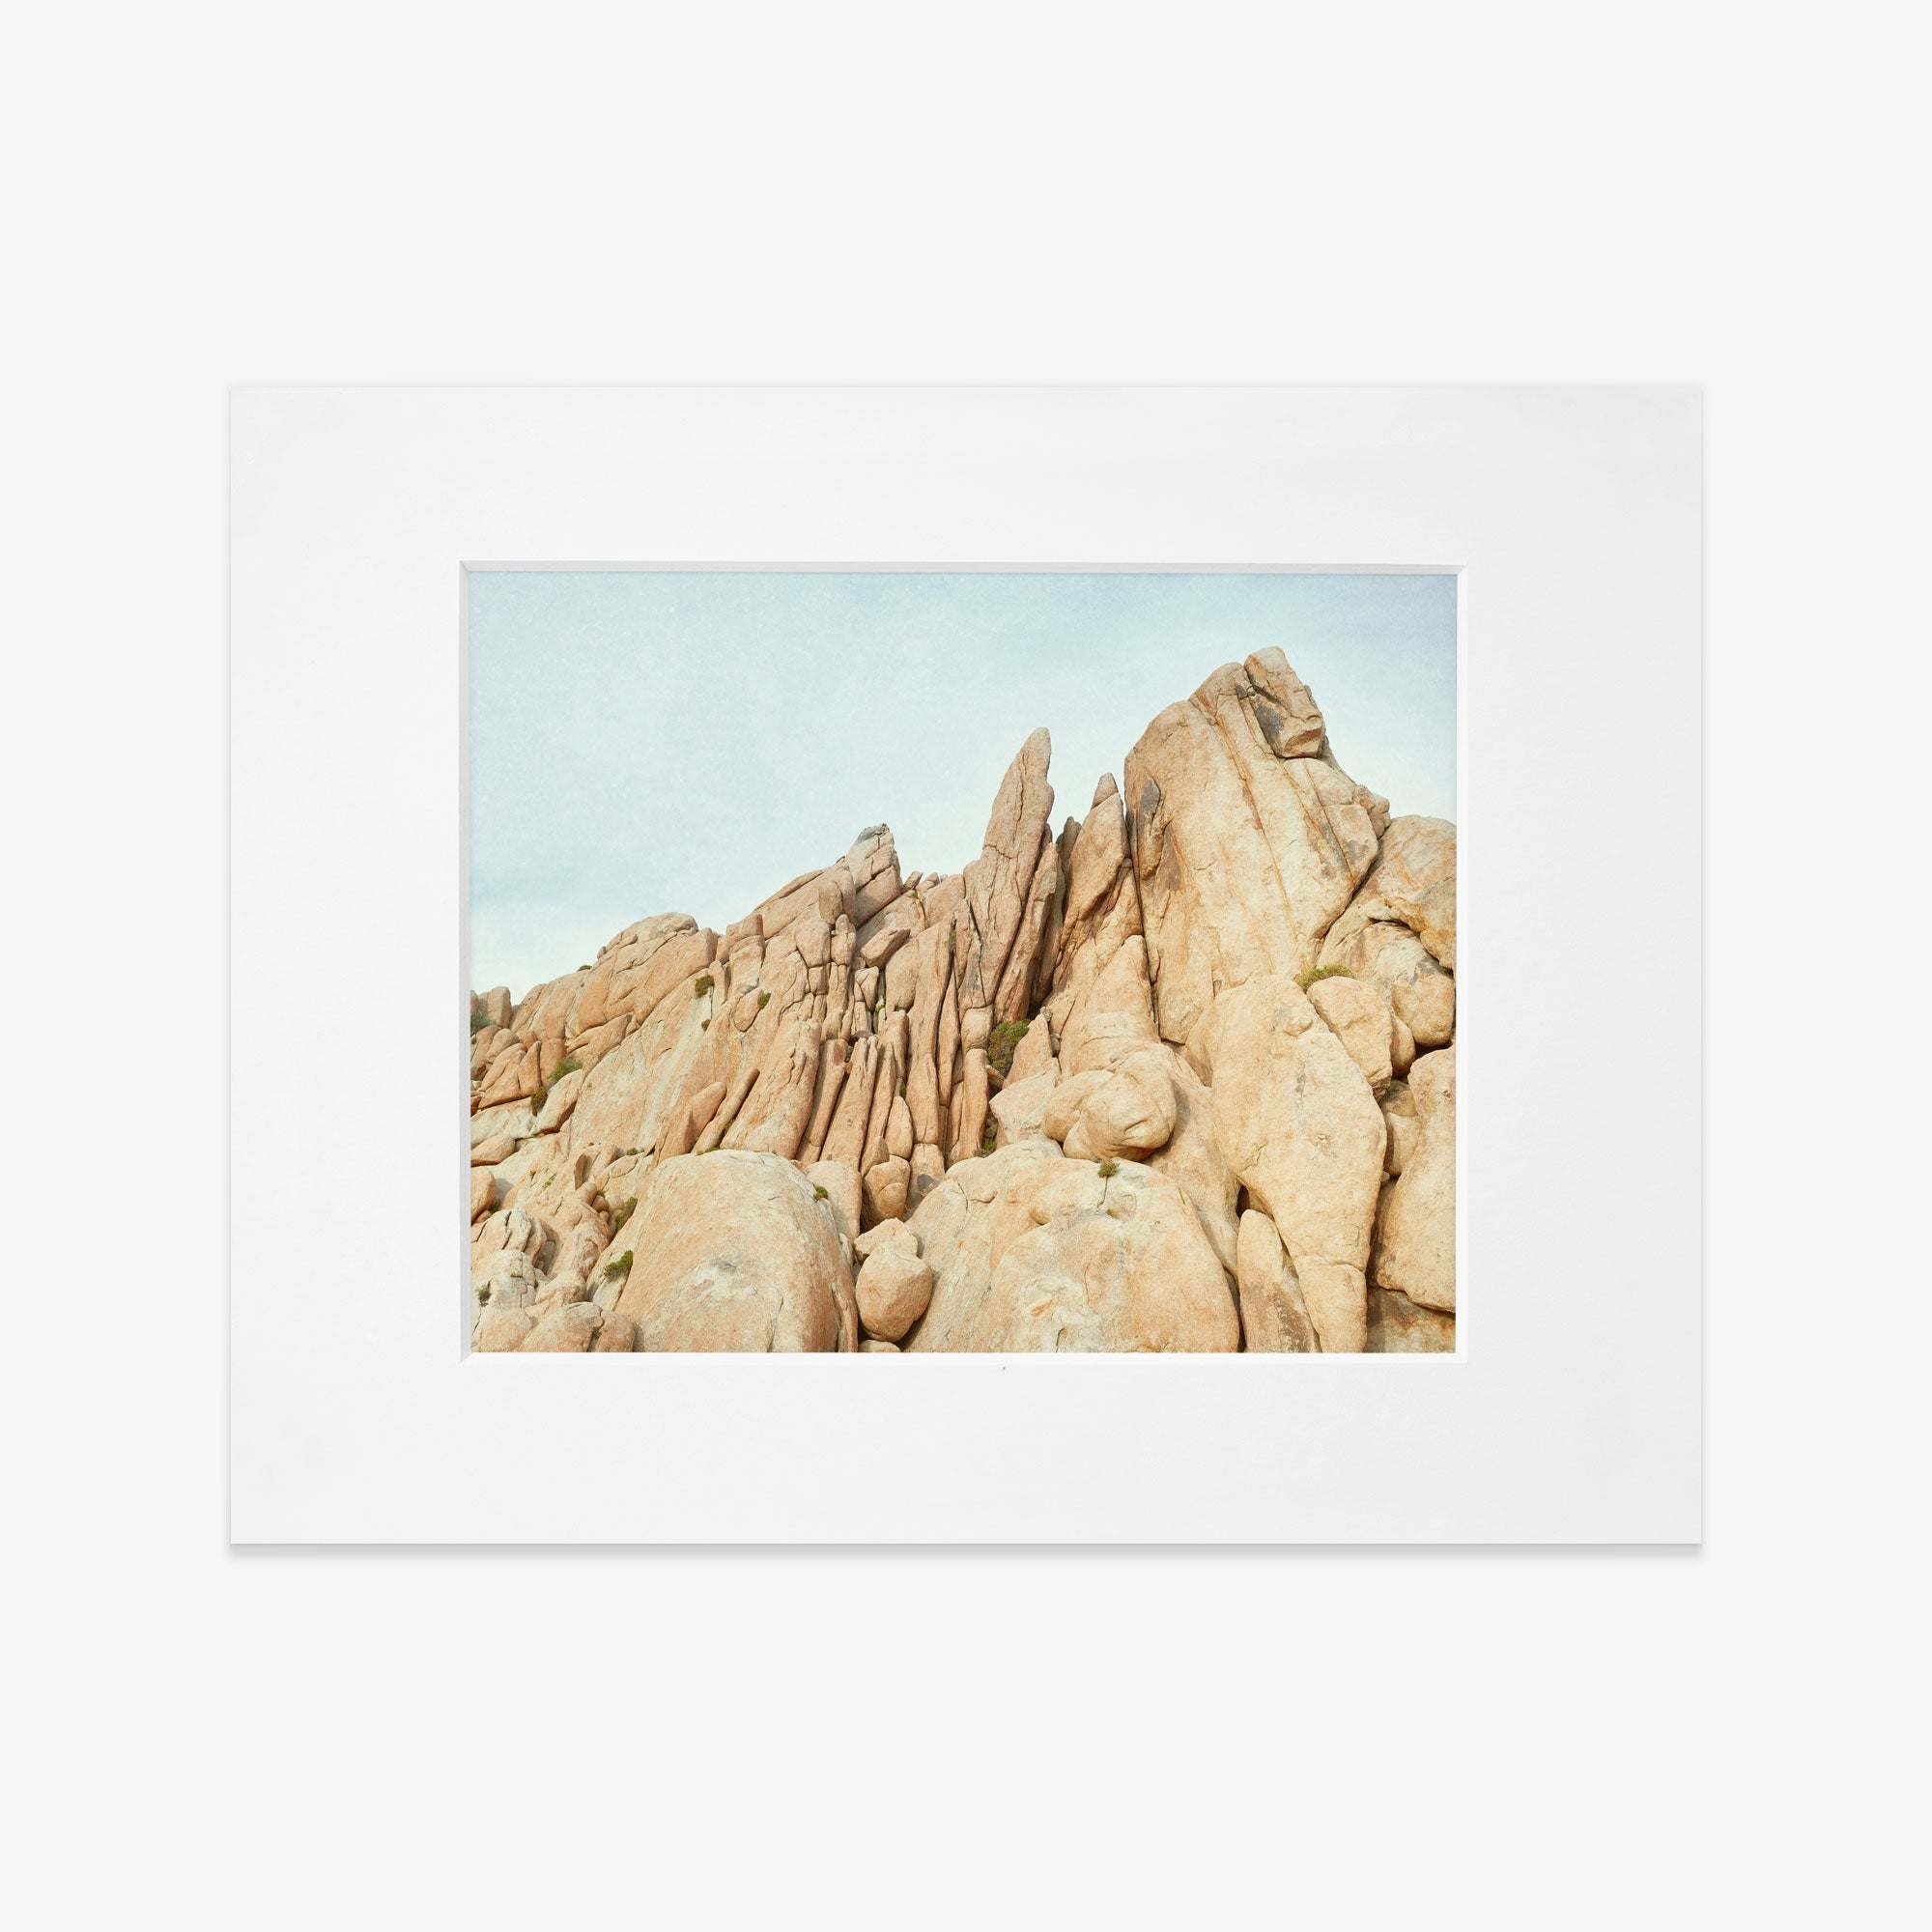 A framed photograph of a rugged desert landscape featuring large, weathered rock formations under a clear sky. The image is centered within a white matting inside an Offley Green frame and printed on archival photographic paper.